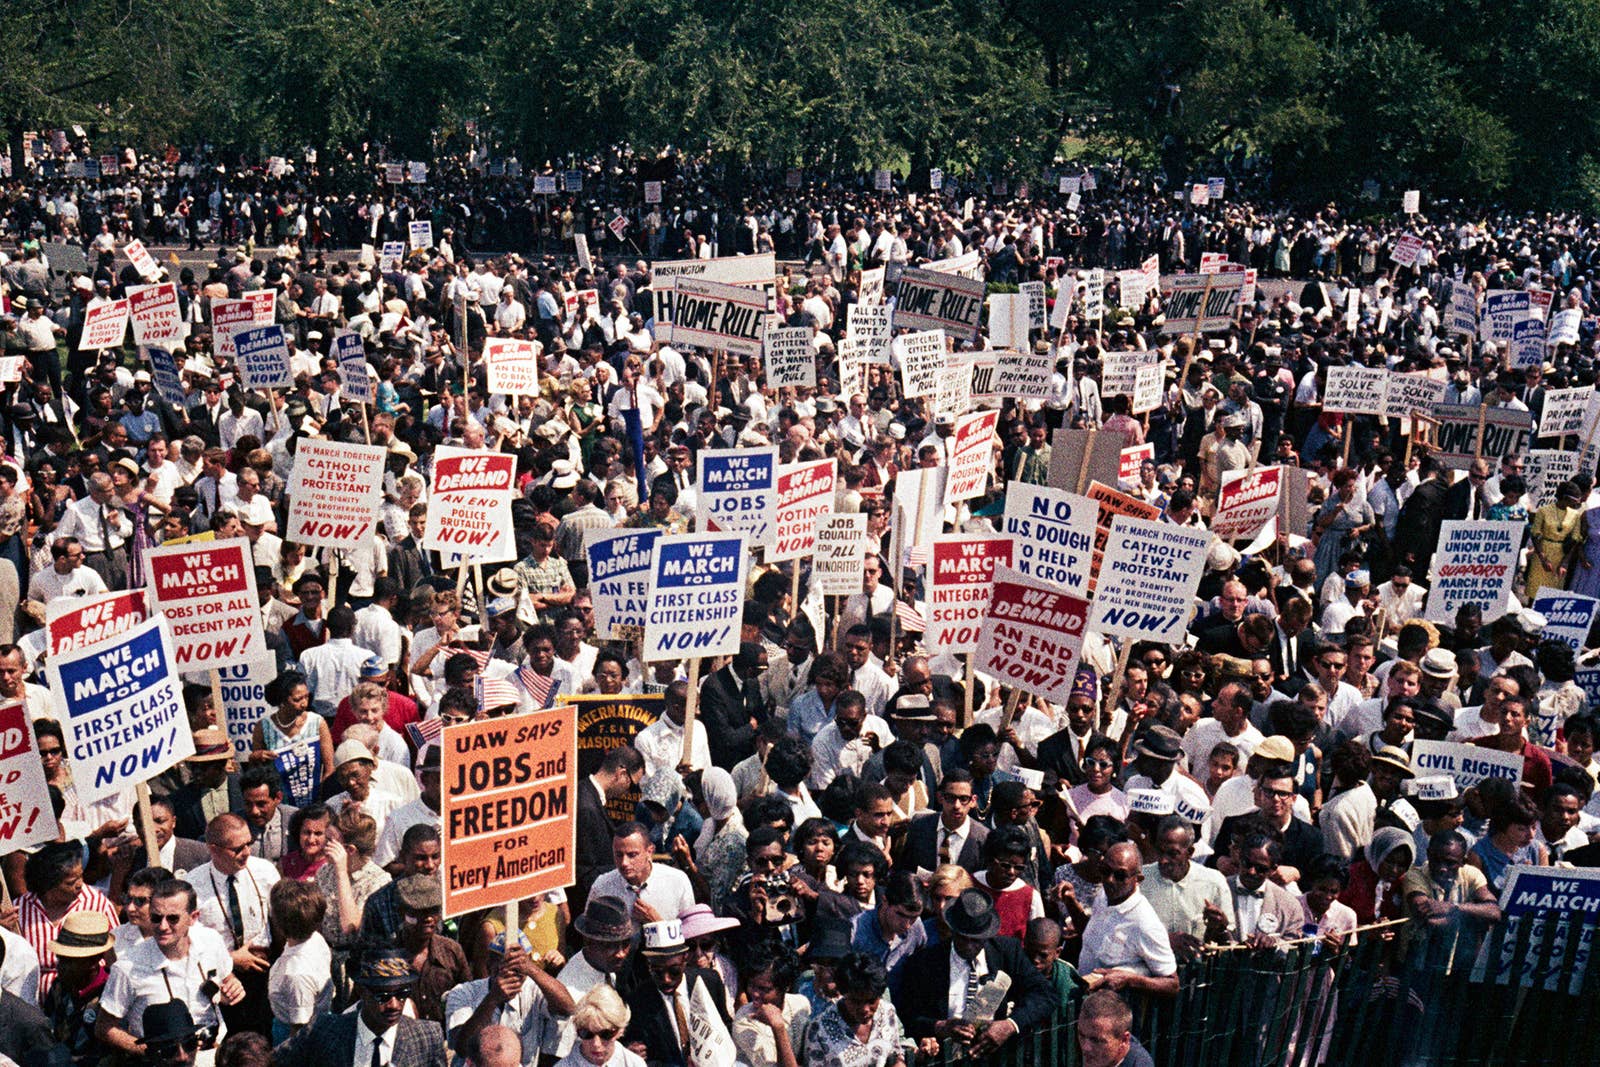 A general view of the crowd holding signs during the March on Washington.